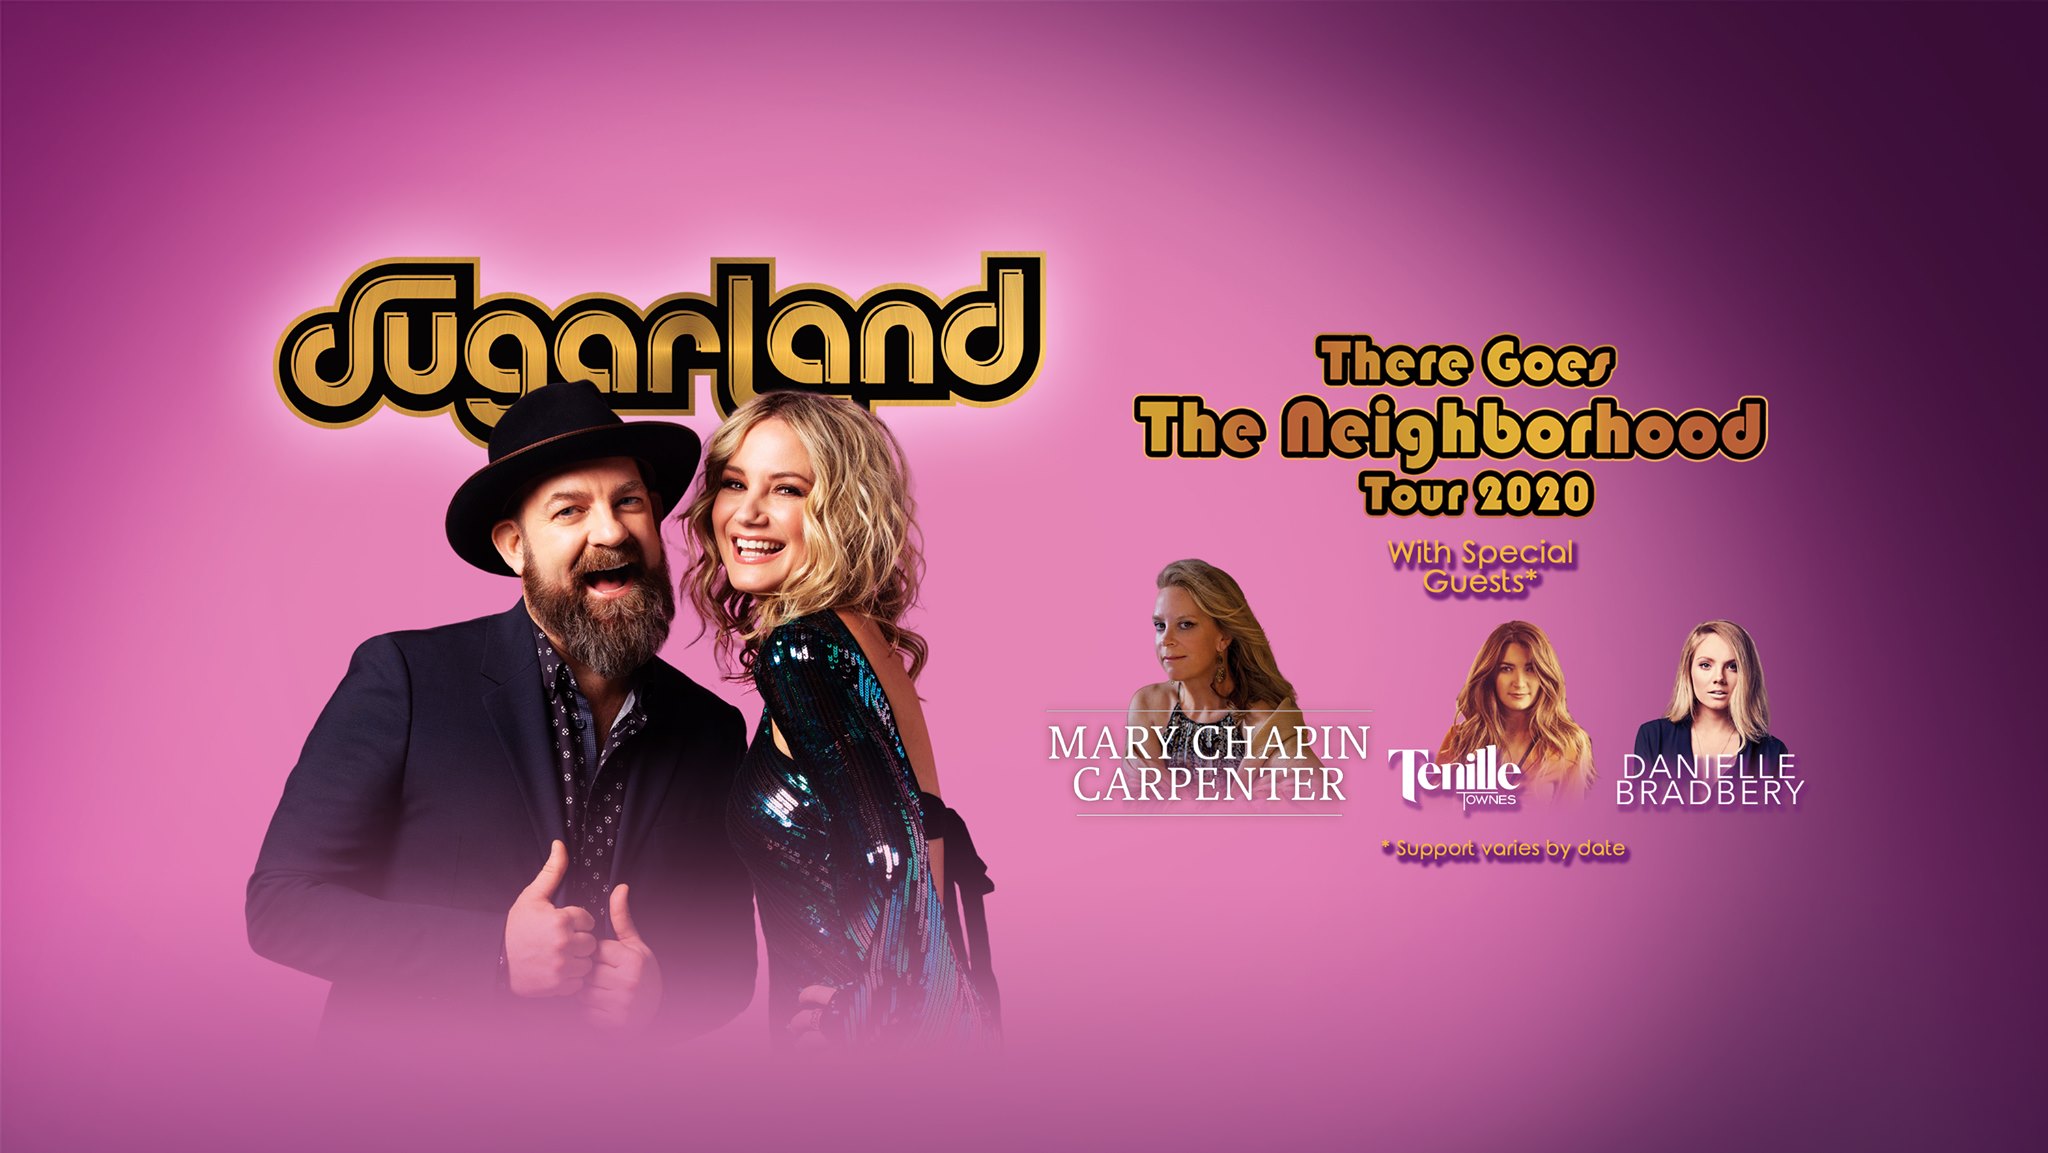 SUGARLAND Announce Summer Tour & Live EP